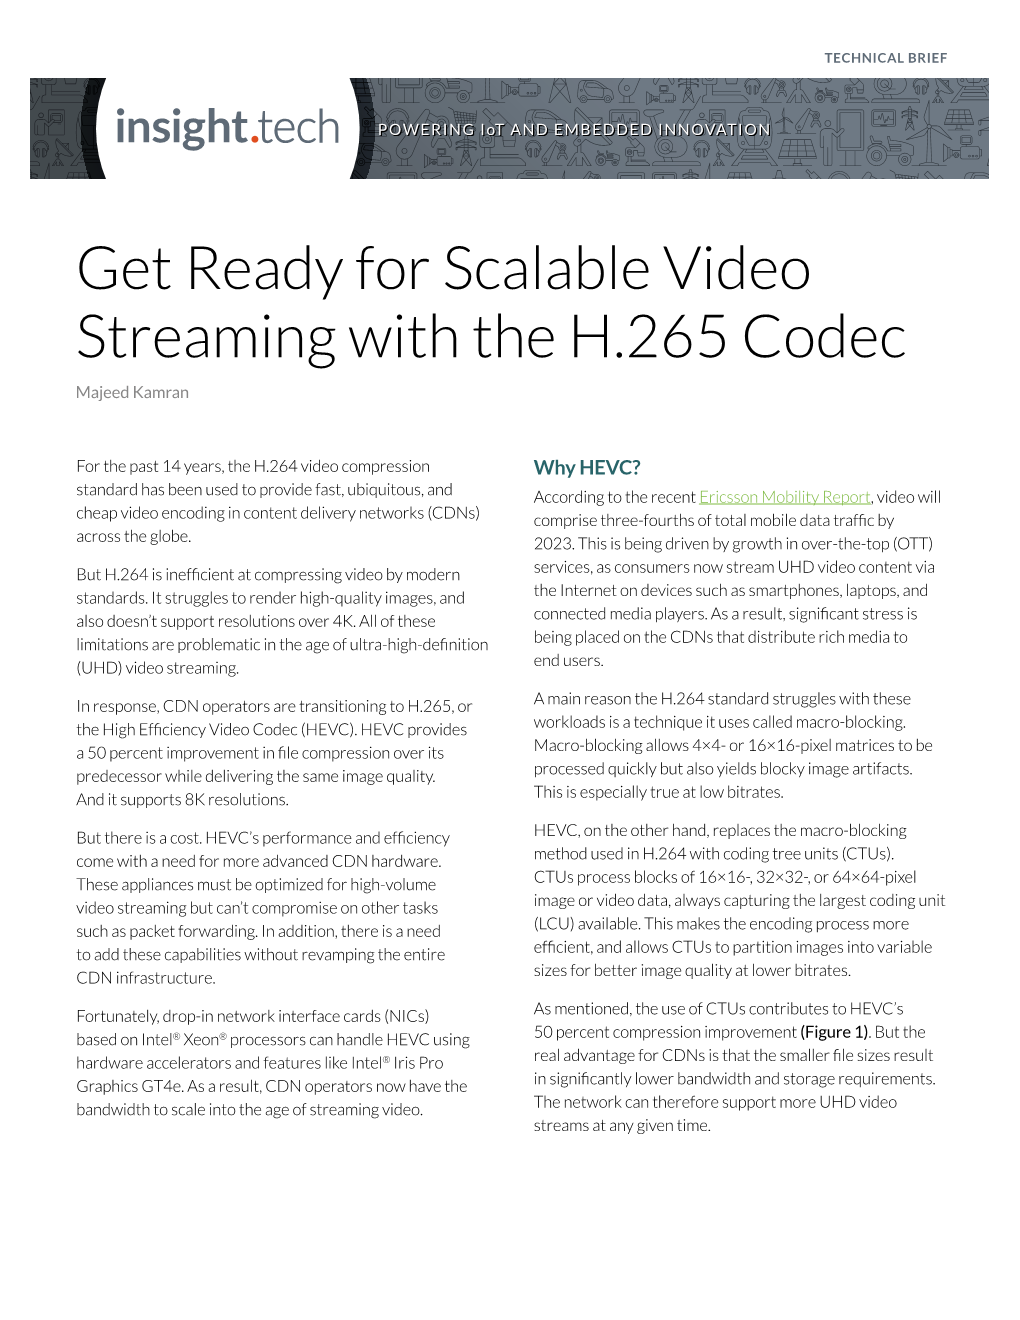 Get Ready for Scalable Video Streaming with the H.265 Codec Majeed Kamran